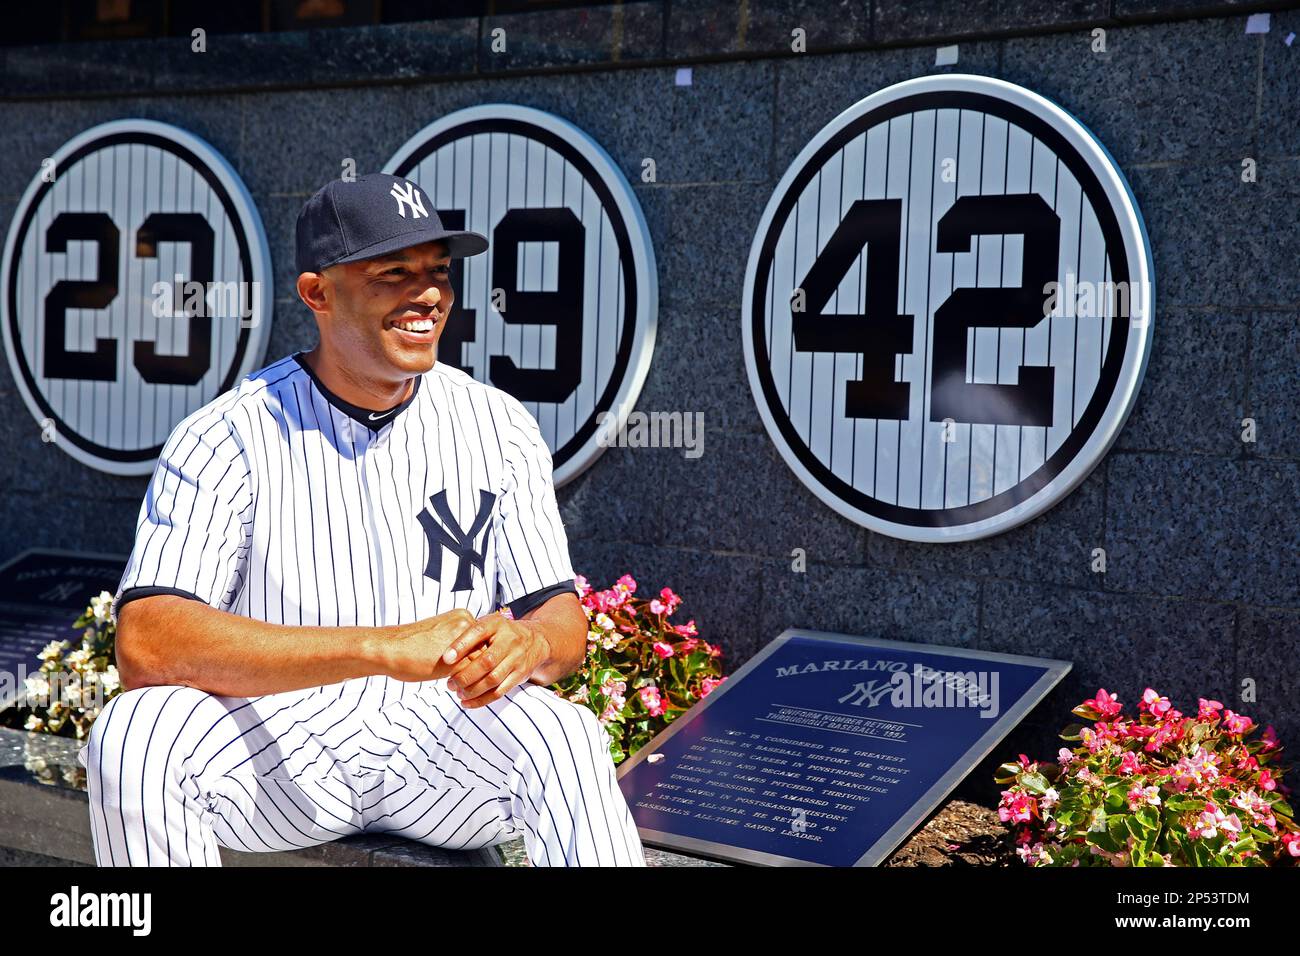 New York Yankees relief pitcher Mariano Rivera (42) poses with a